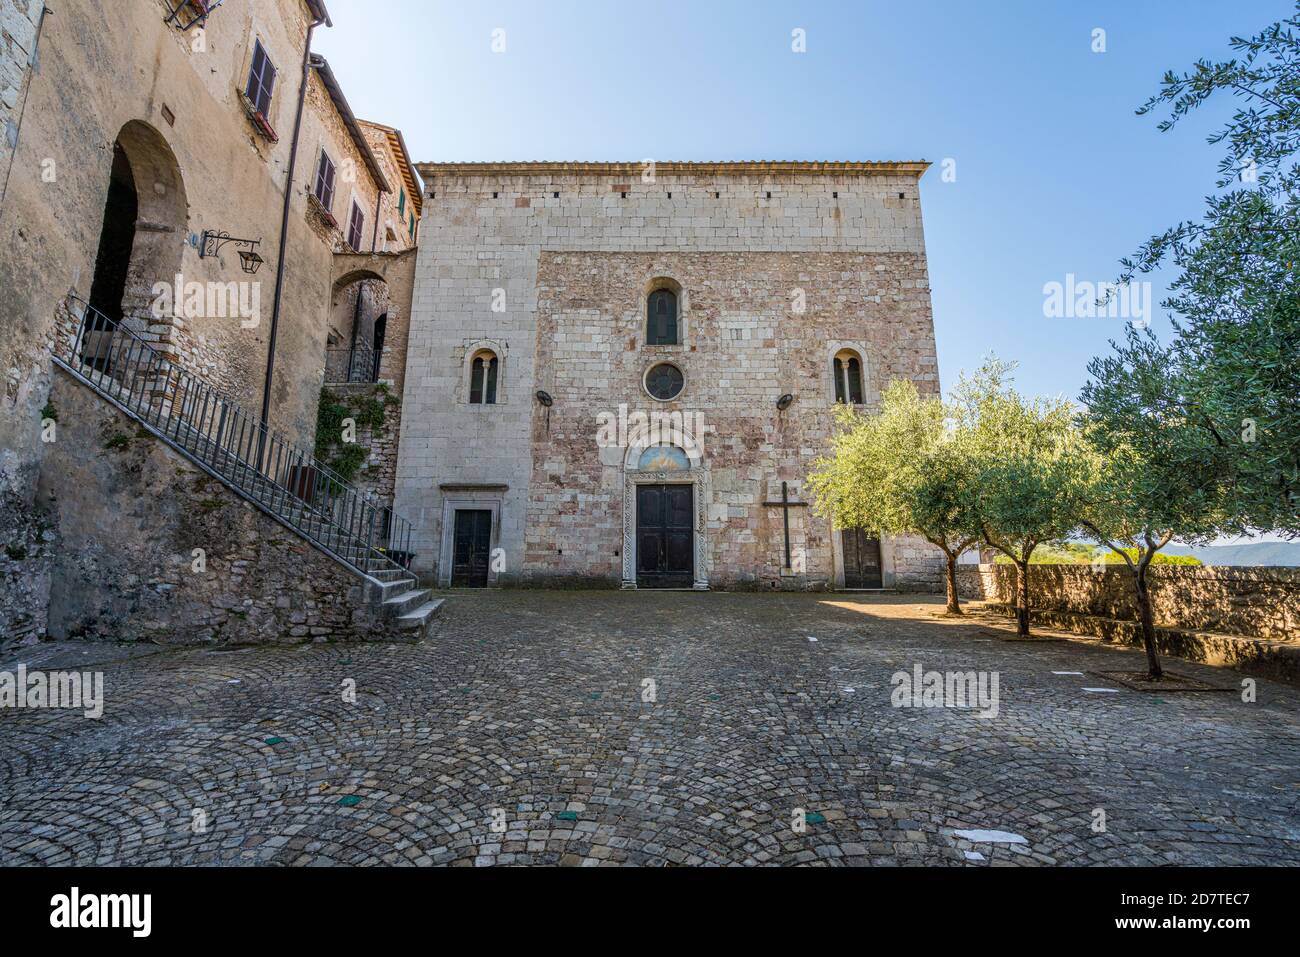 The beautiful medieval village of Stroncone. Province of Terni, Umbria, Italy. Stock Photo